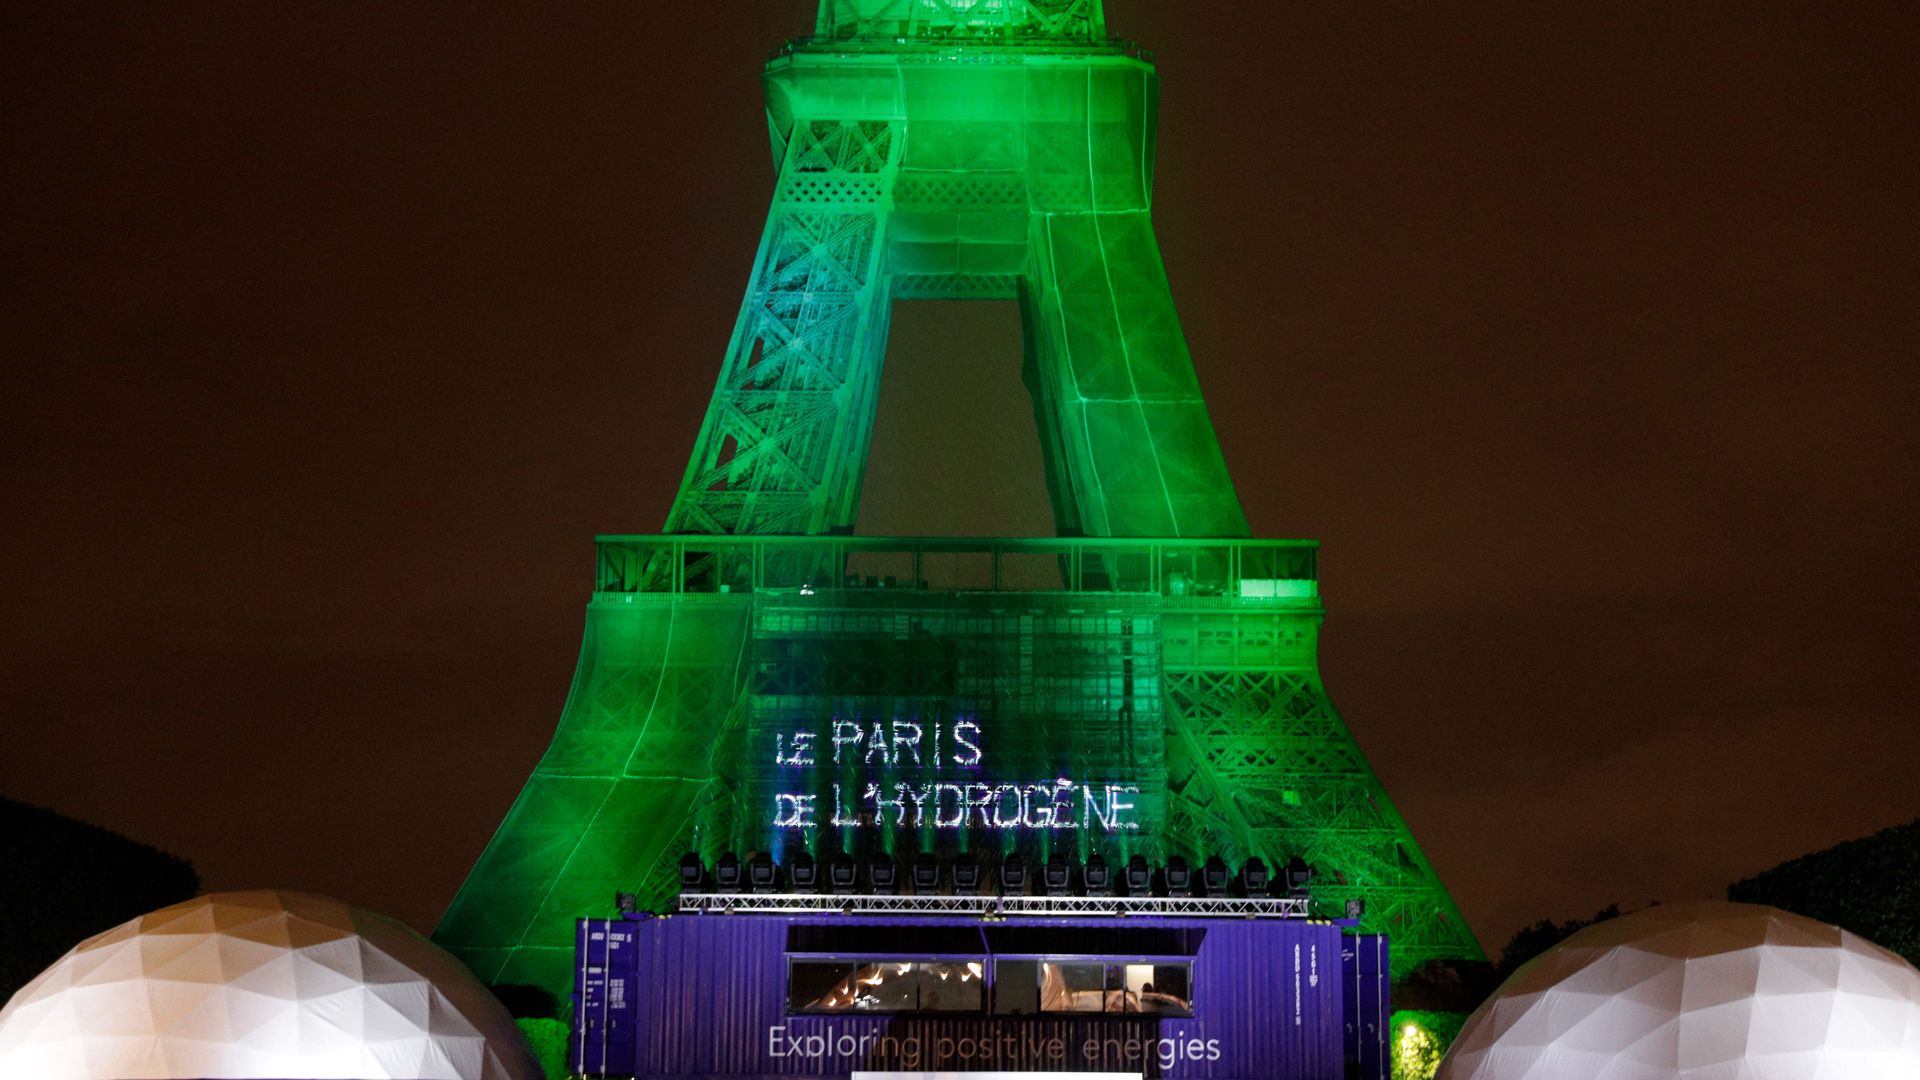 Eiffel tower lit in green with a message about hydrogen power.